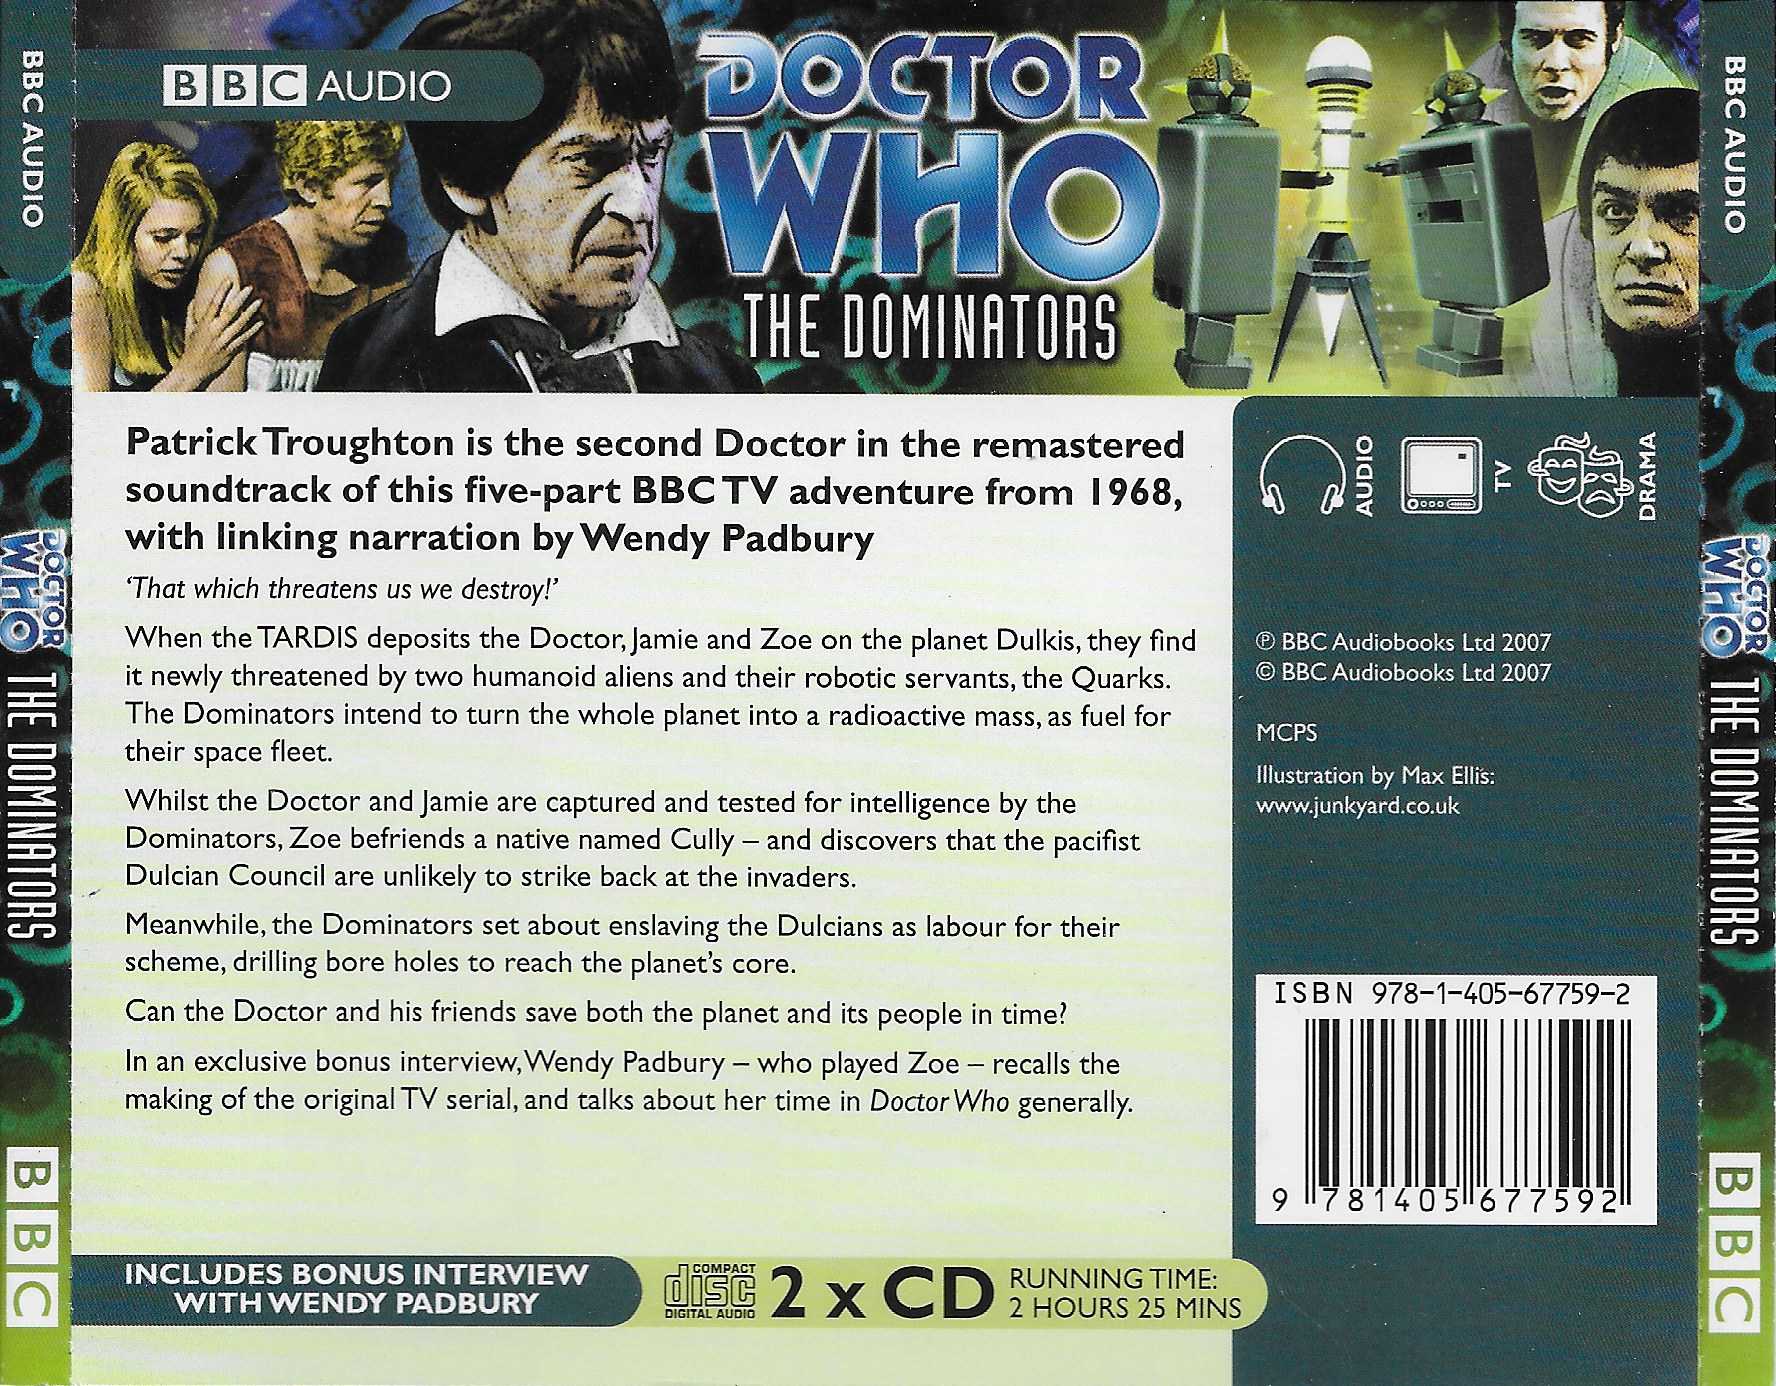 Picture of ISBN 978-1-405-67759-2 Doctor Who - The Dominators by artist Norman Ashby from the BBC records and Tapes library